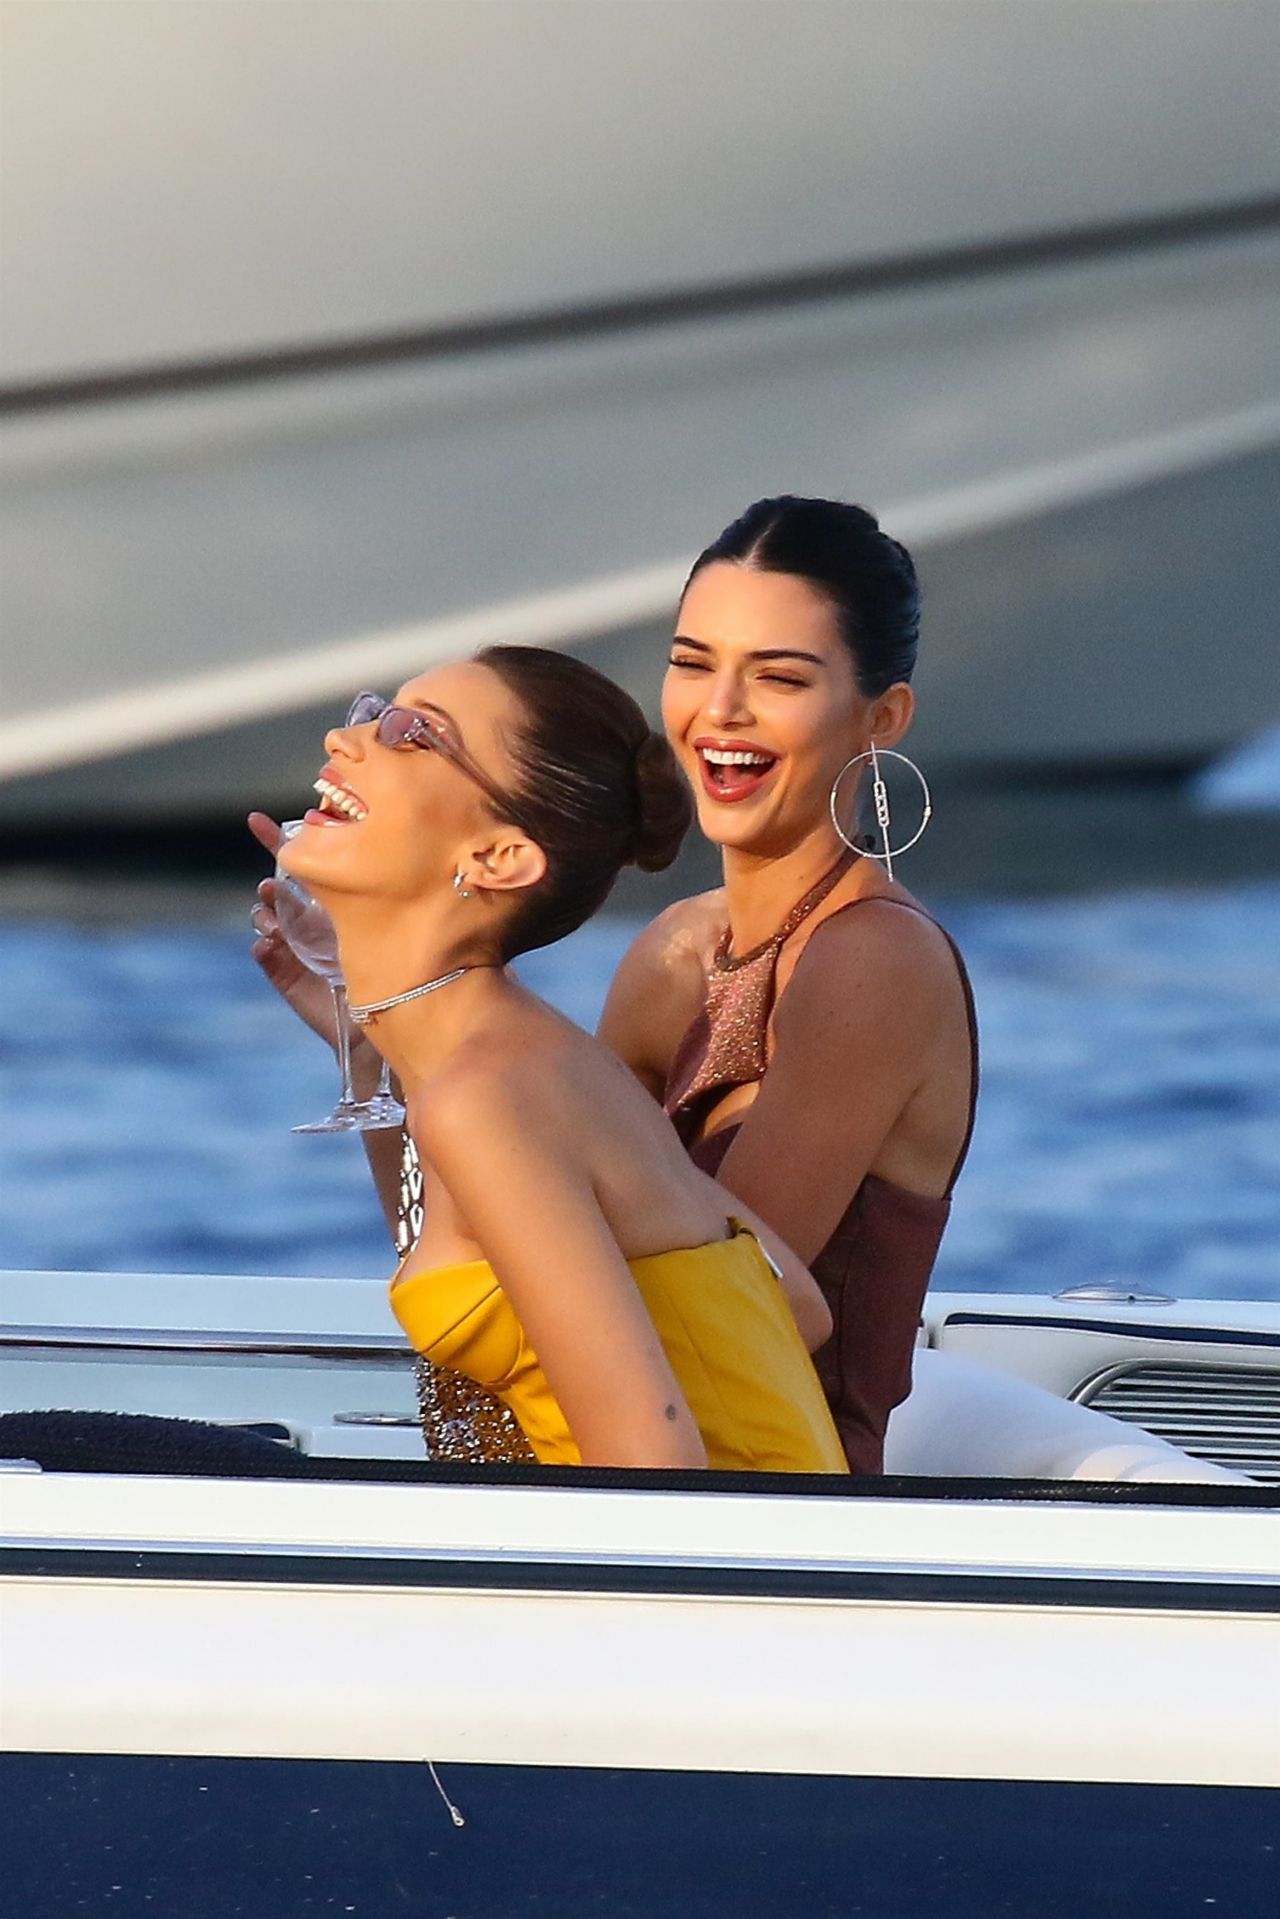 bella-hadid-and-kendall-jenner-tommy-hilfigers-yacht-in-monaco-05-25-2019-9.jpg